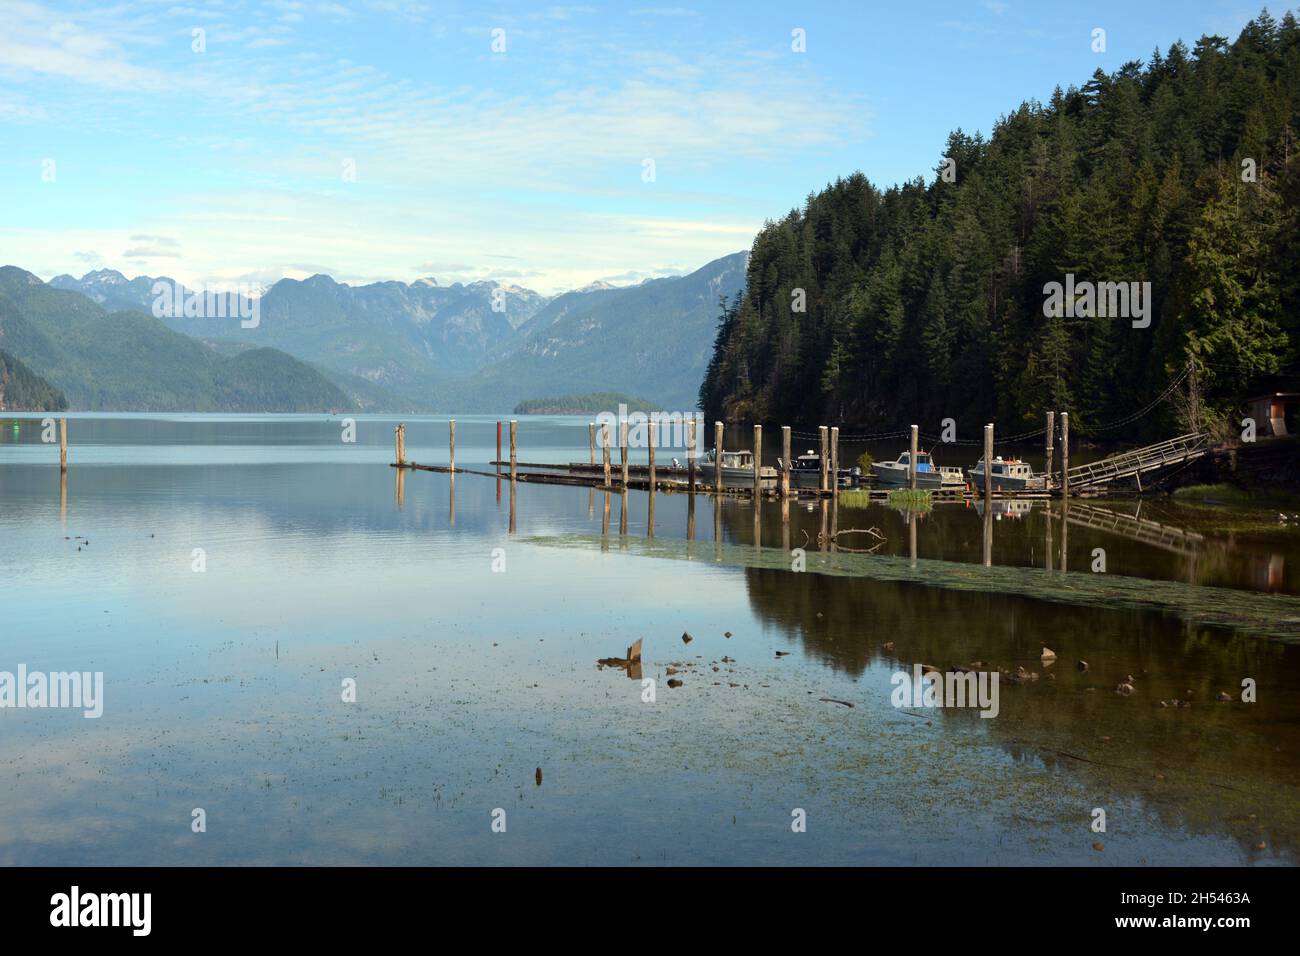 A boat dock on Pitt Lake, one of the world's largest tidal lakes, and the mountains of the Garibaldi Range, Pitt Meadows, British Columbia, Canada. Stock Photo